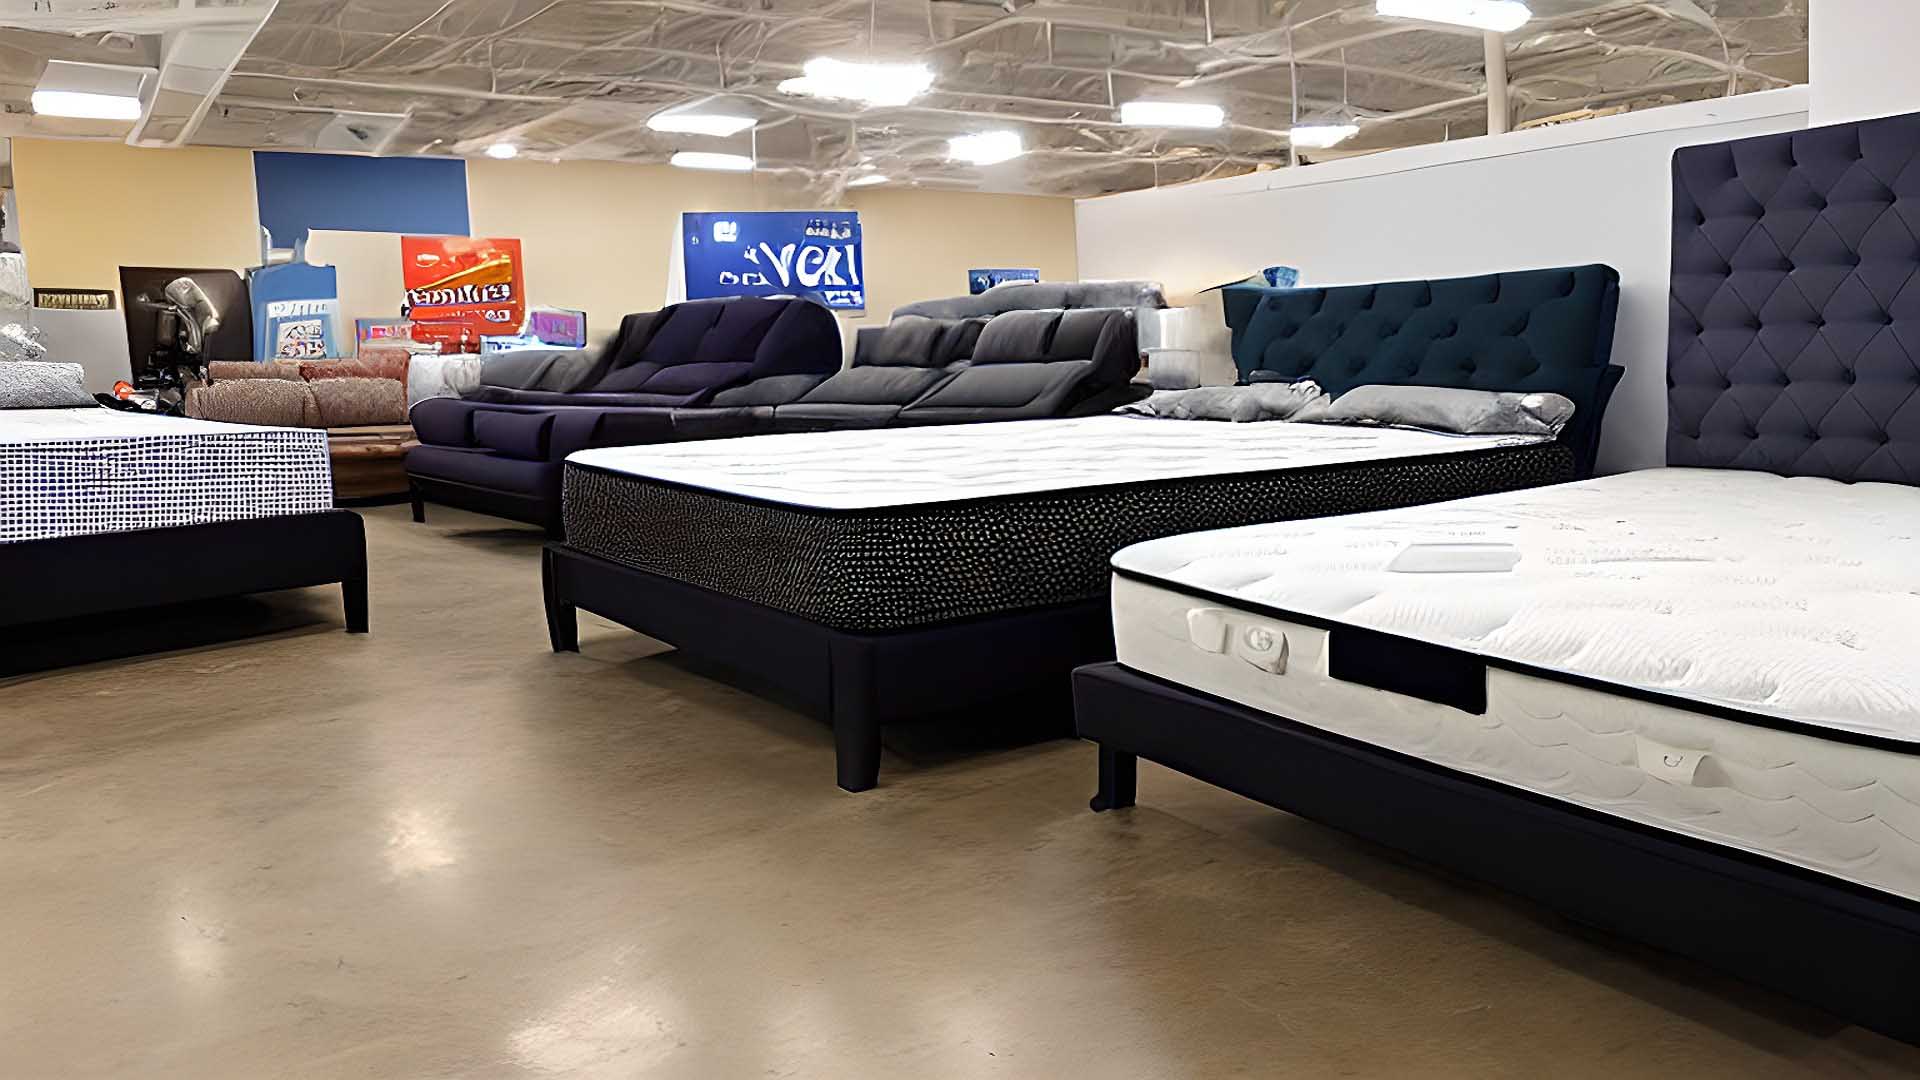 Mattress Sales & Deals in Southaven, MS